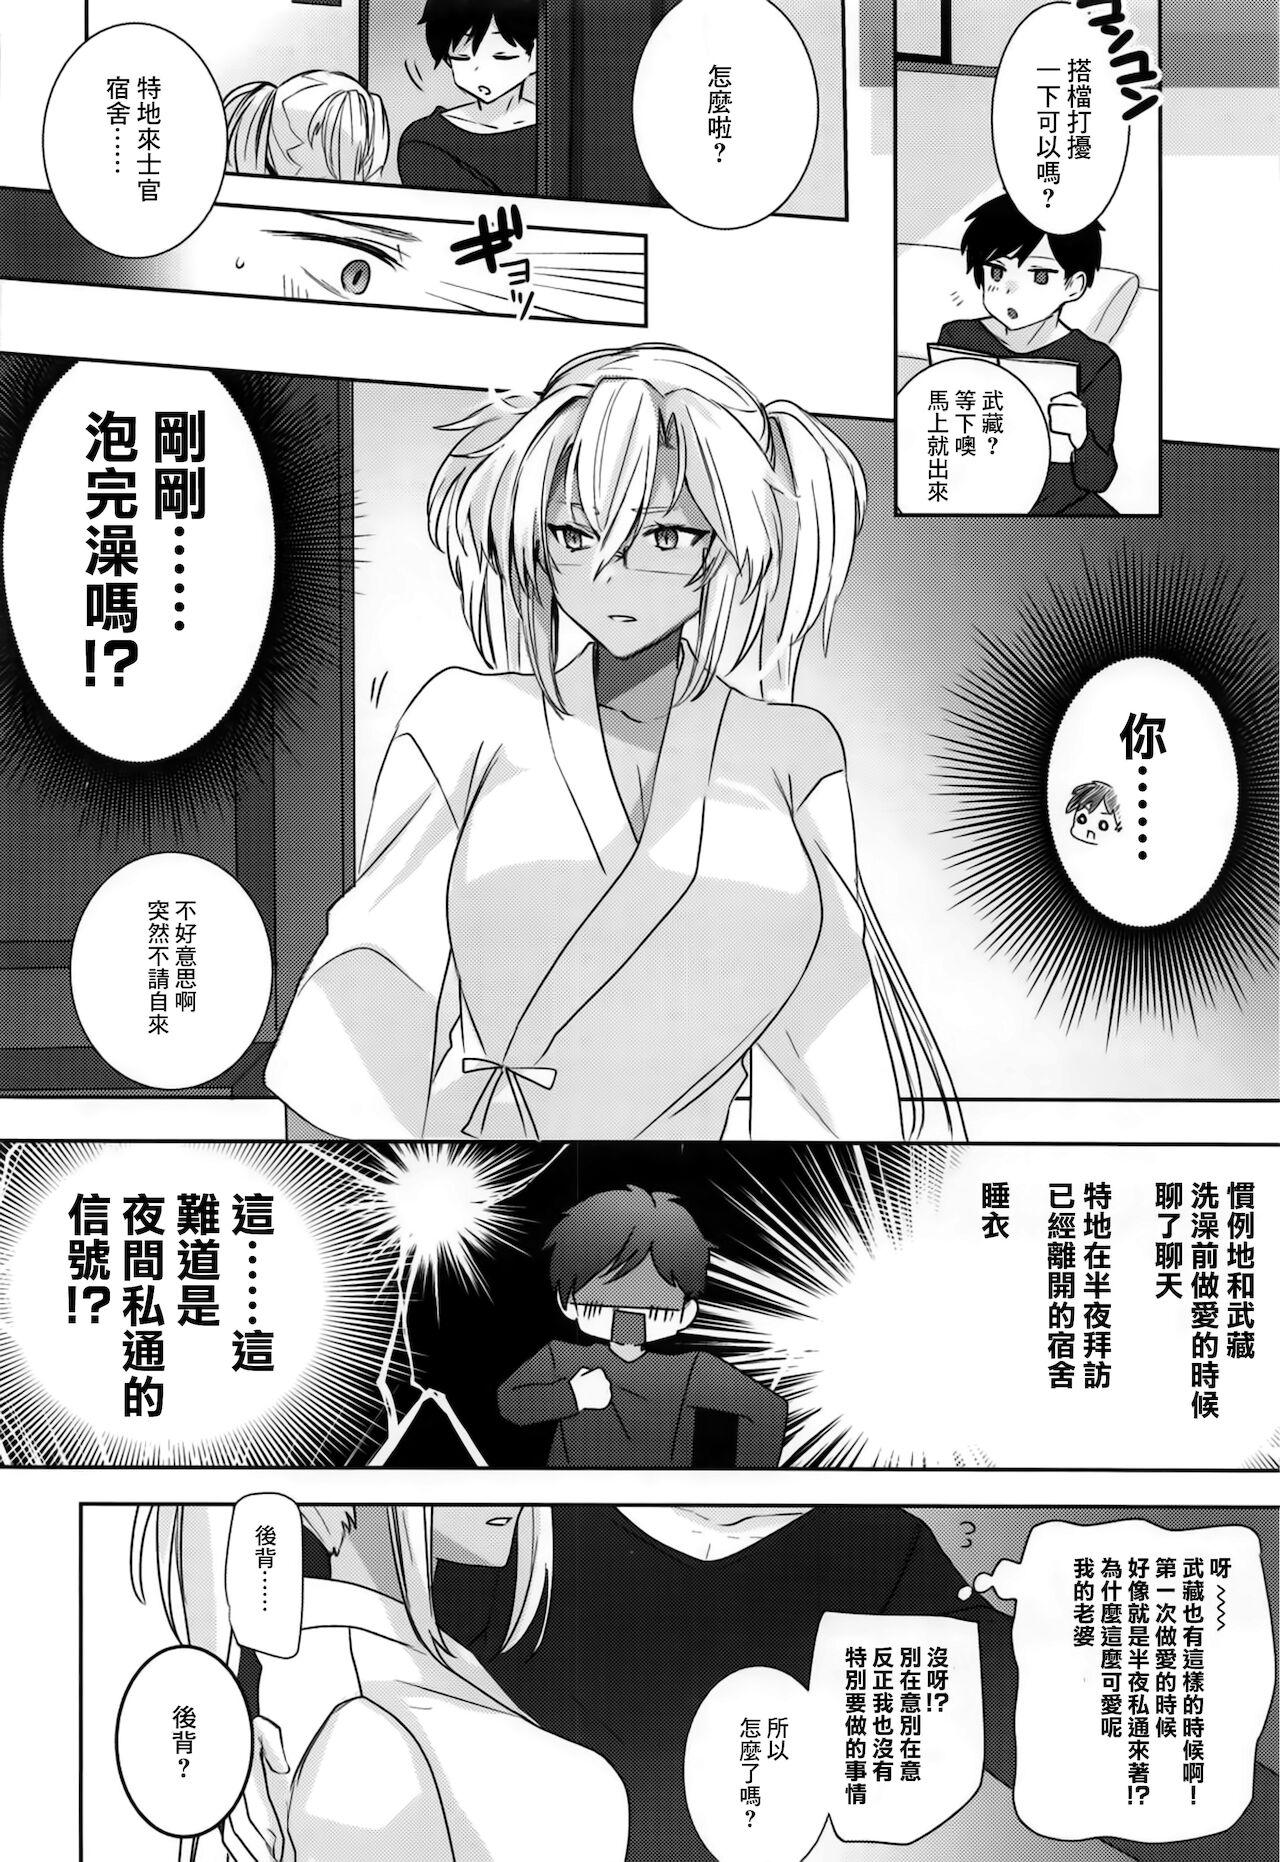 New 武蔵さんの夜事情 秘書艦の匙加減編 - Kantai collection Rough Sex Porn - Page 11